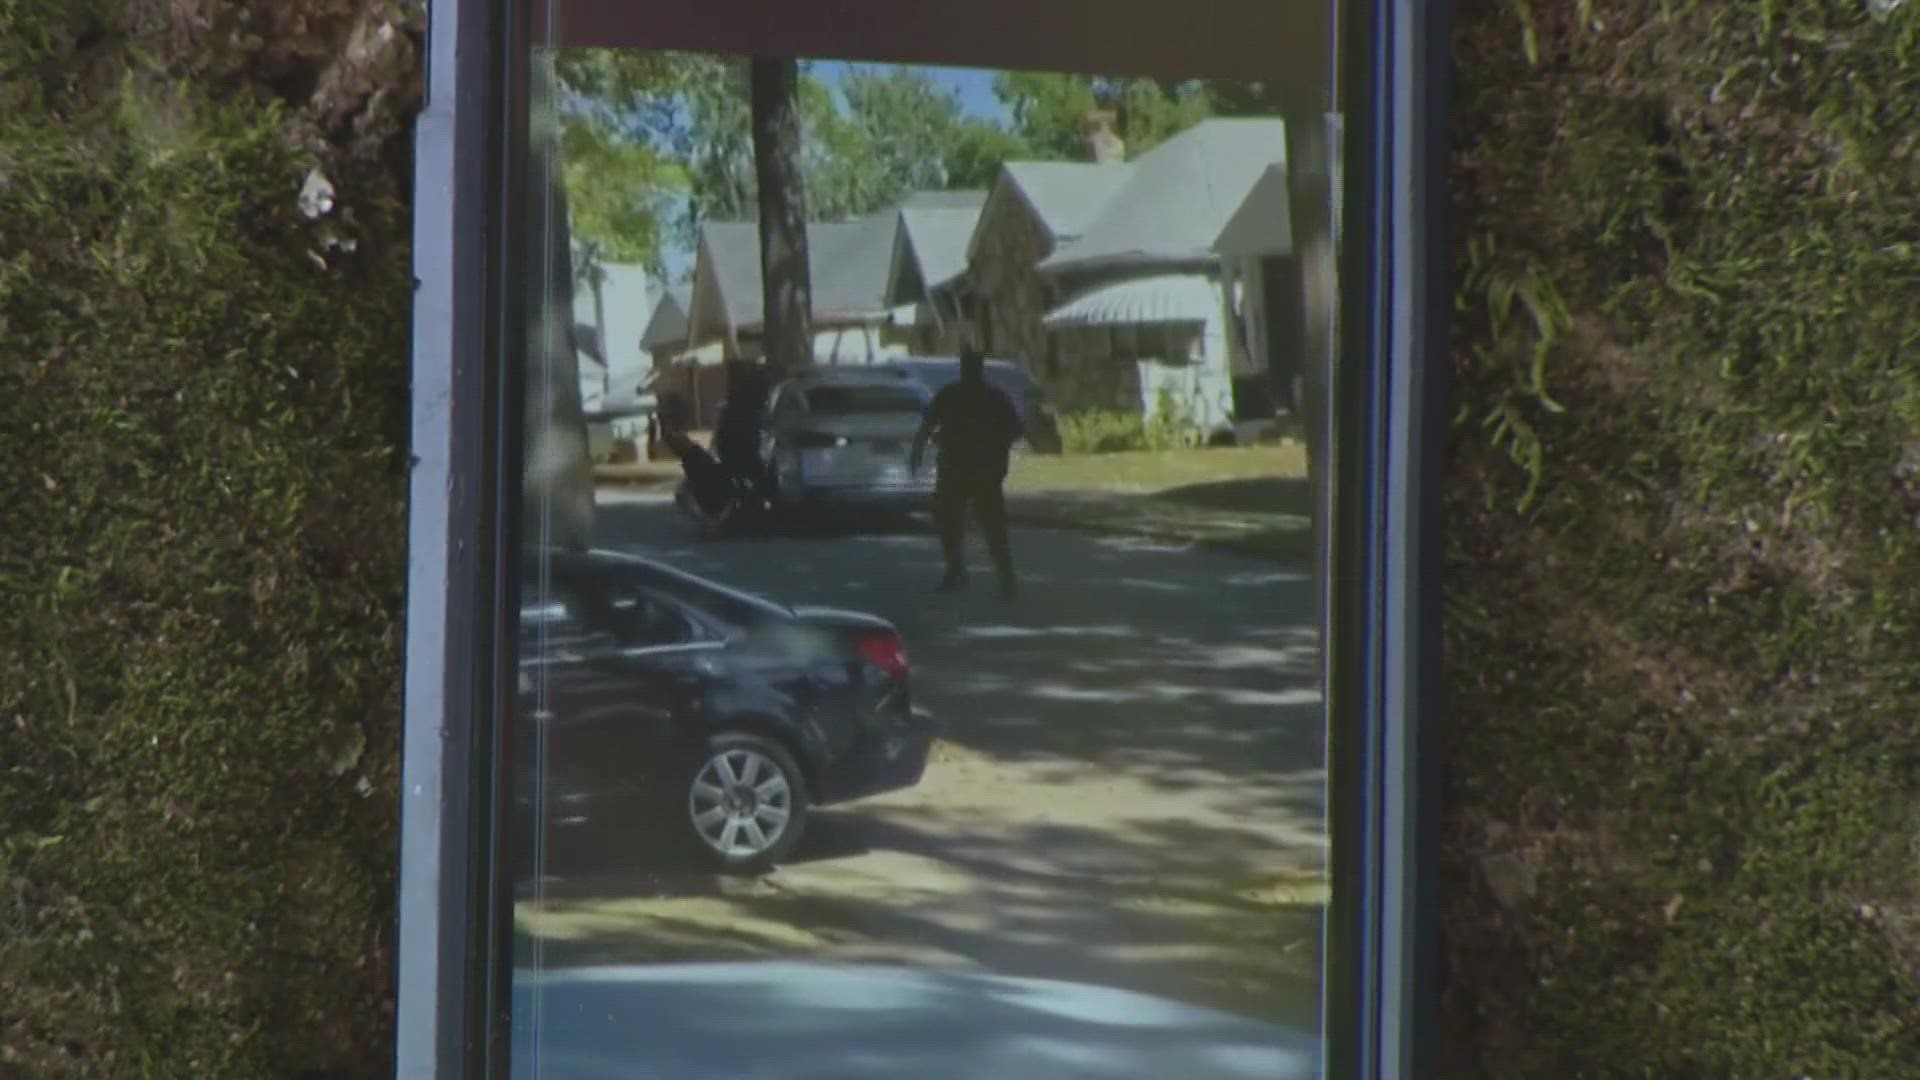 Scharell Houston watched from her front porch as a woman slipped past police and into their patrol car Sunday. But she says this is the best-case scenario.